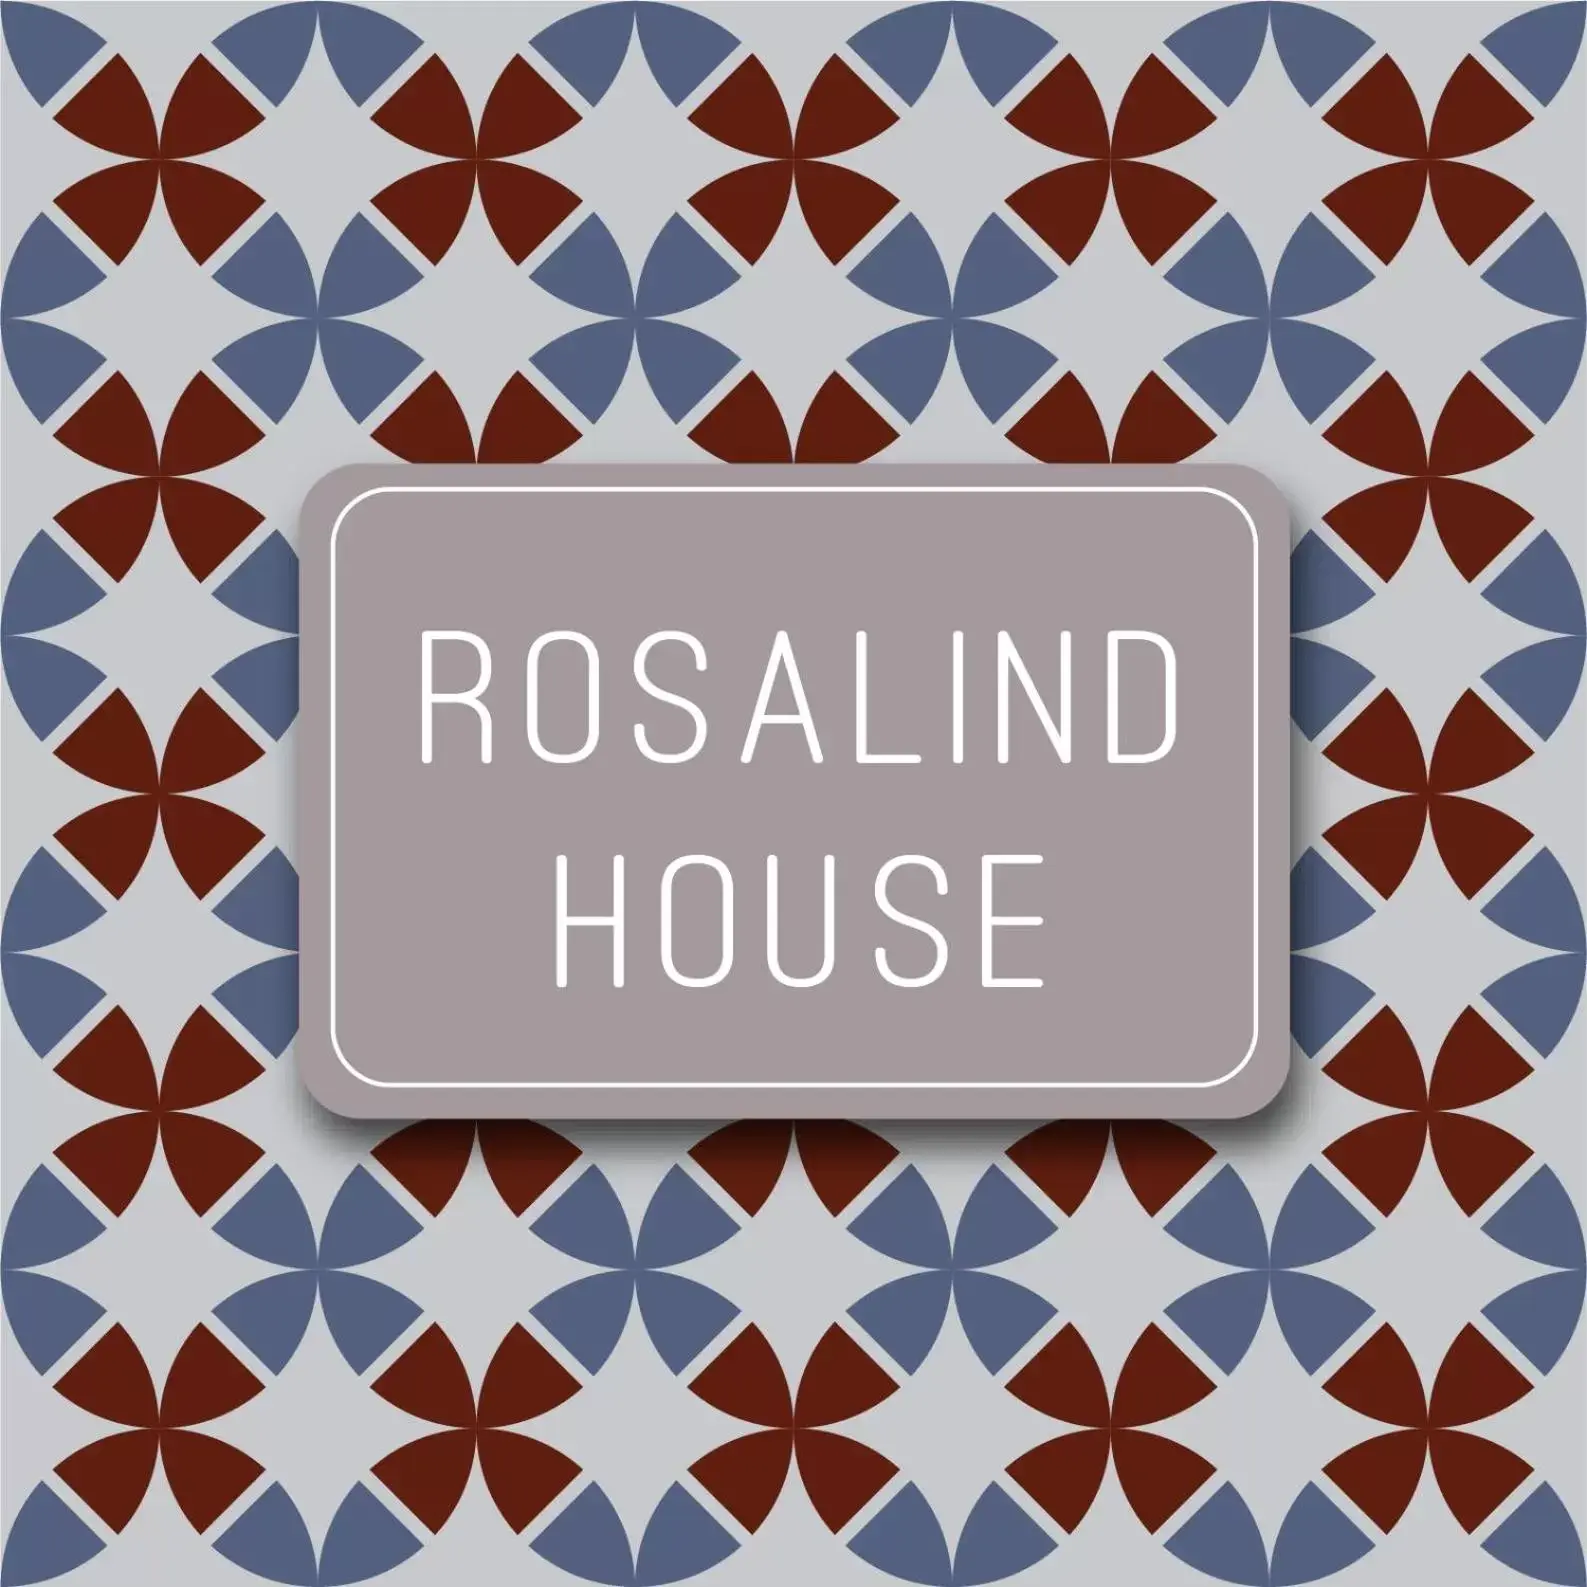 Logo/Certificate/Sign in Rosalind House